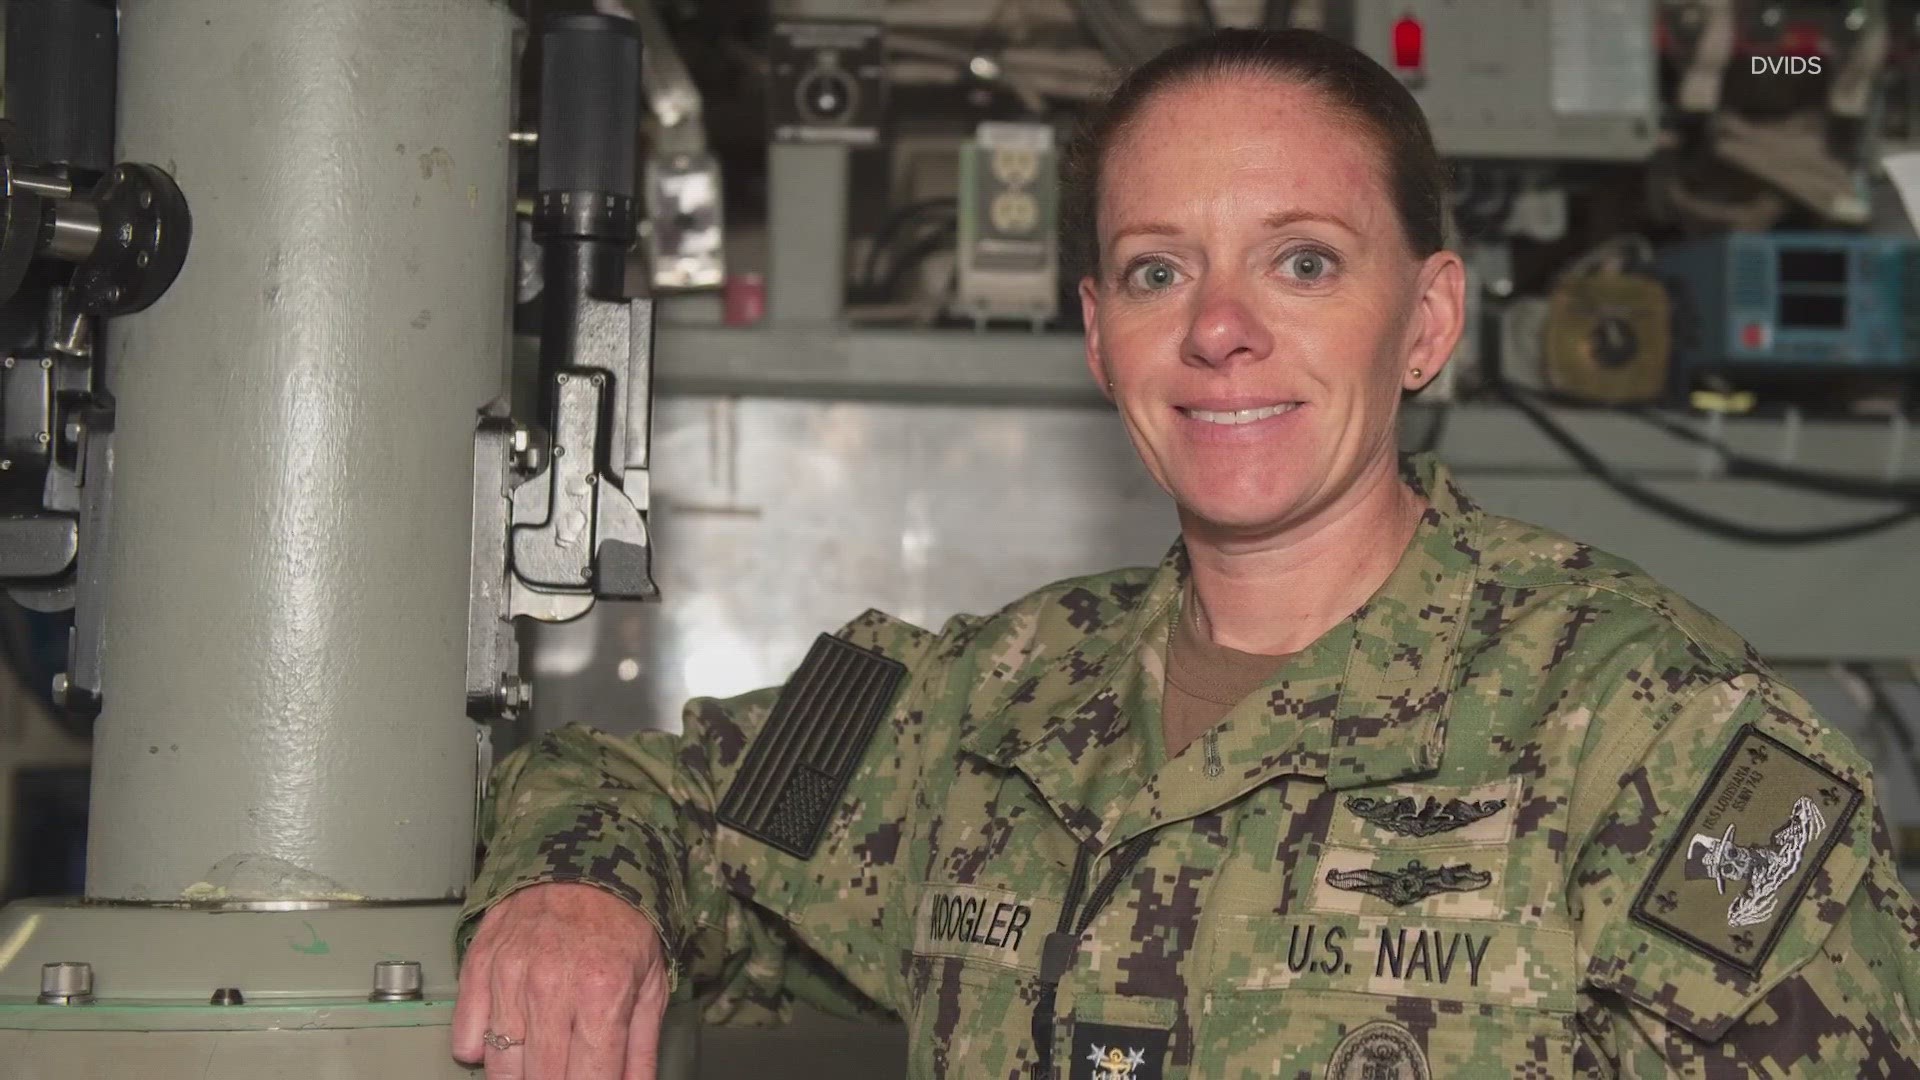 Angela Koogler has been a consistent trailblazer for women in the Navy. She was also one of 38 women who first served on a submarine.